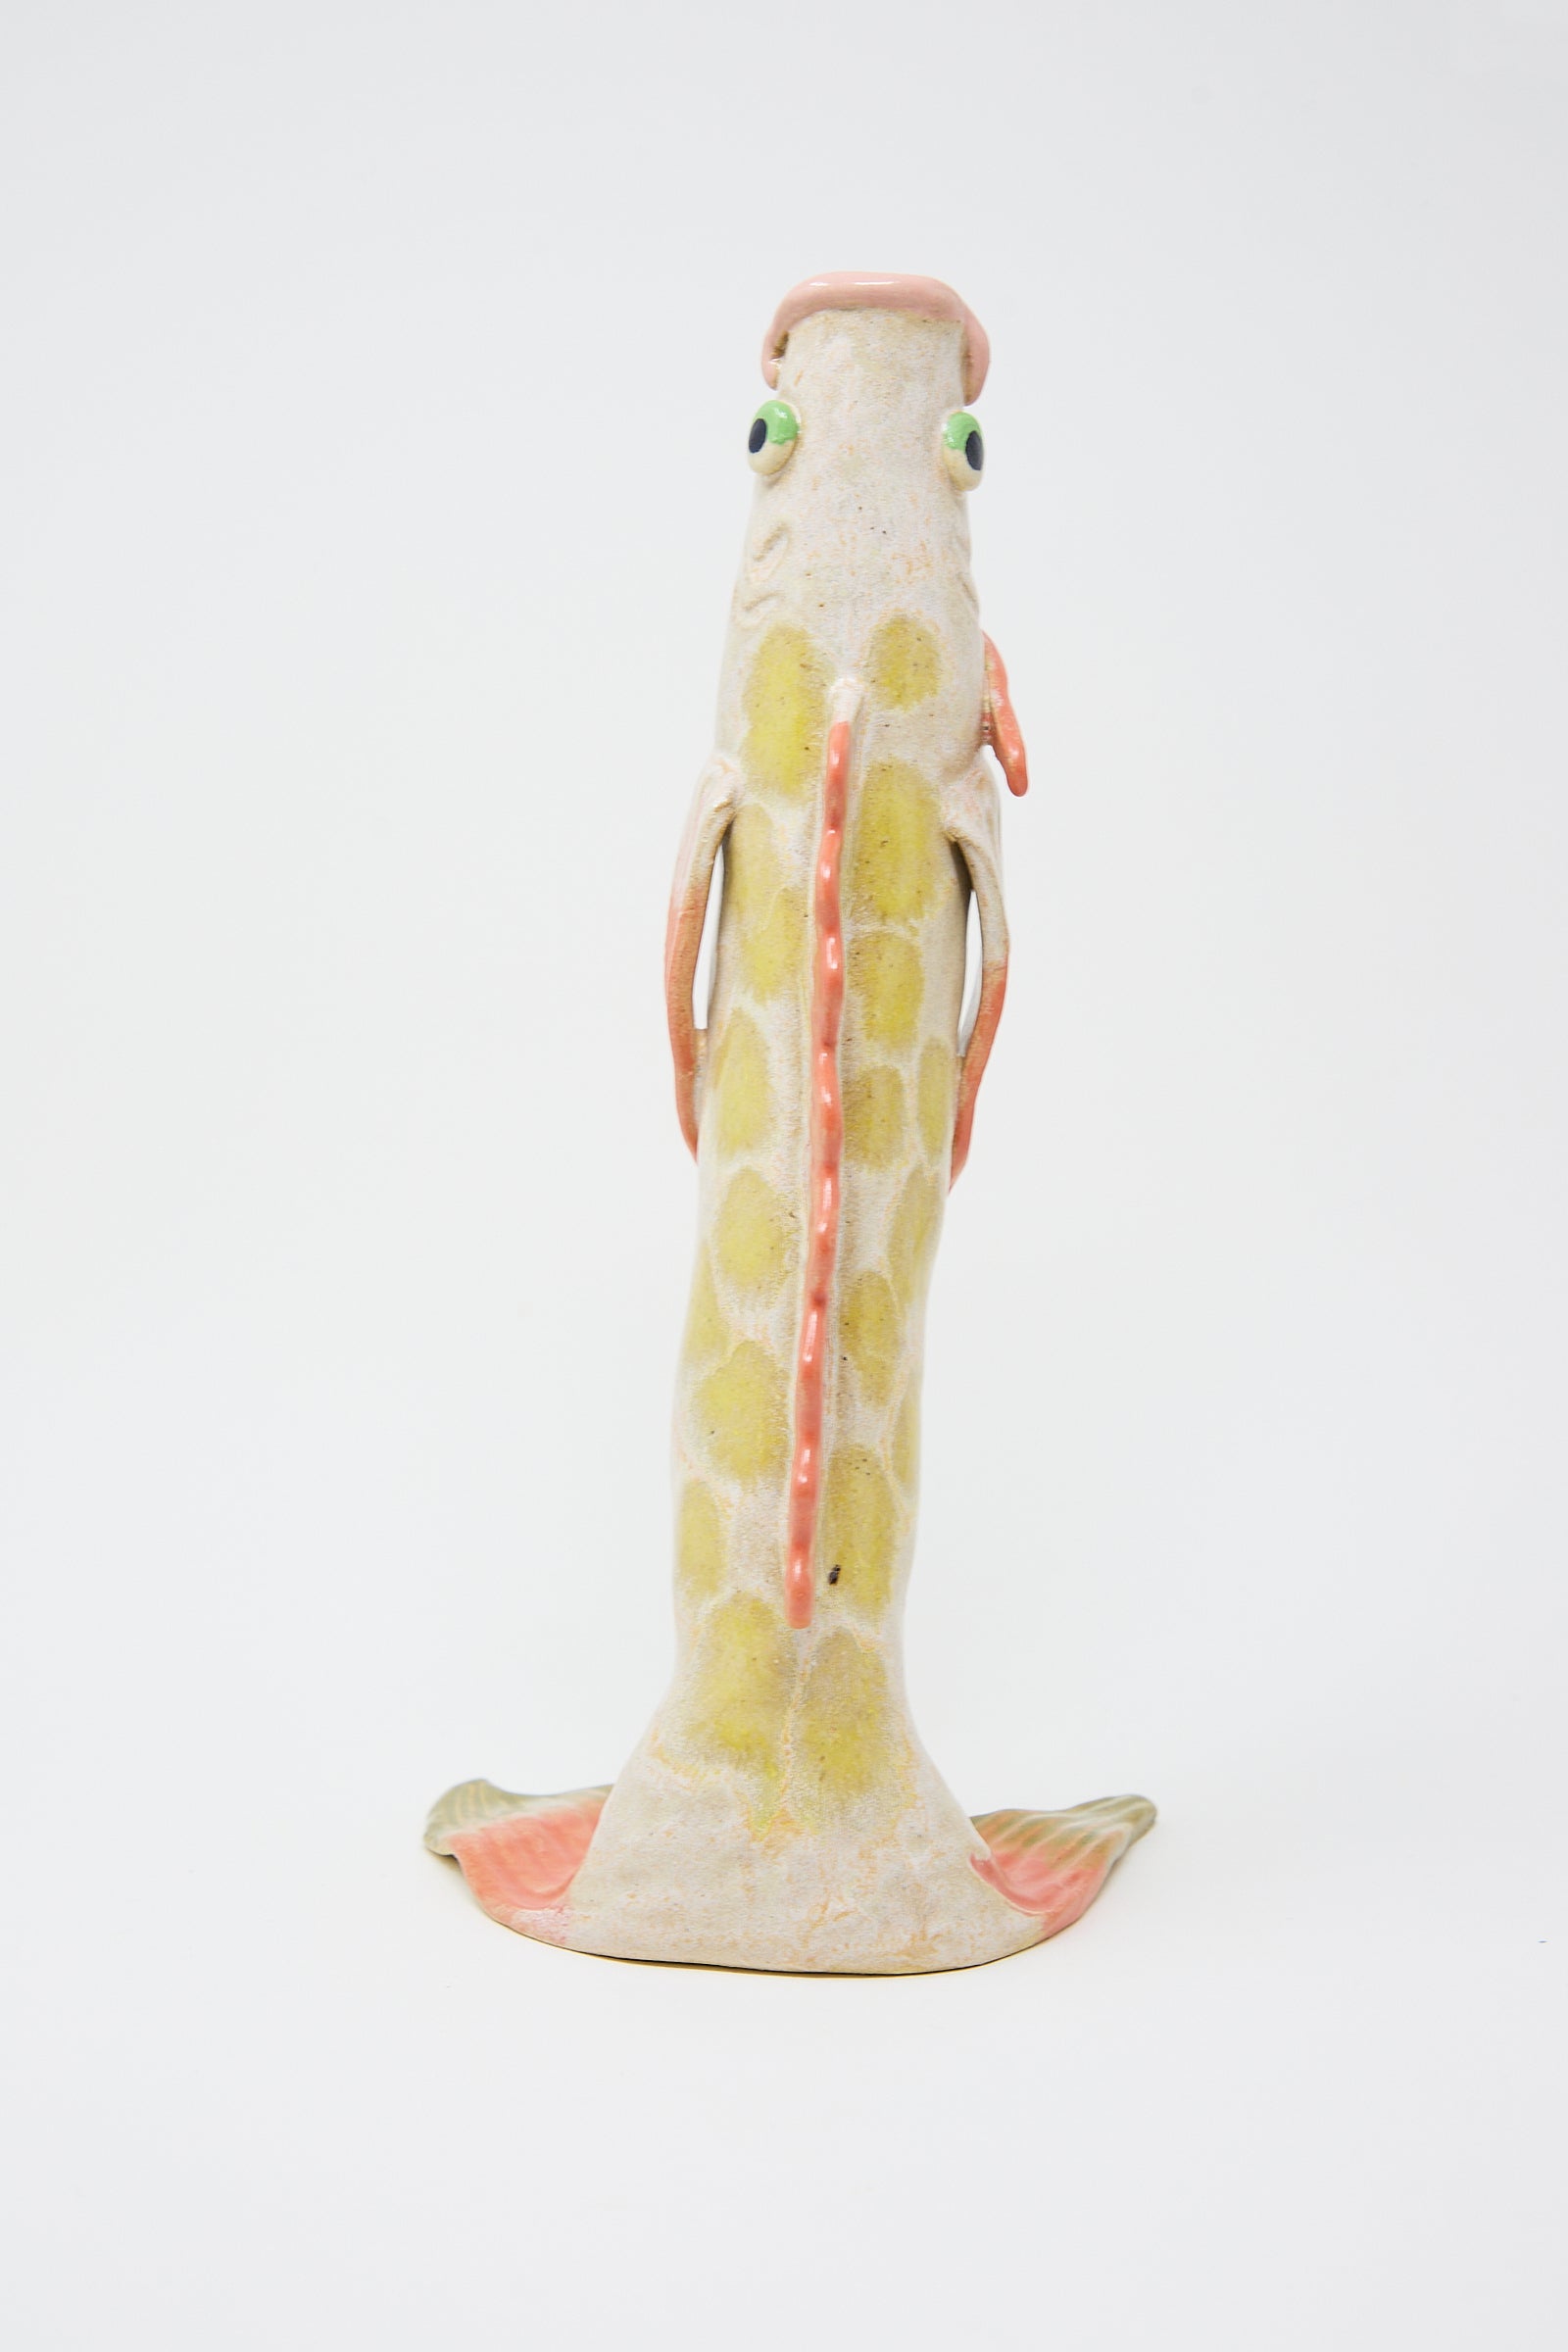 Ceramic figurine of a whimsical, upright koi fish with large eyes, painted in subtle shades of yellow, red, and green, standing on a base that simulates fins – Pearce Williams Fish Vase in Pink.